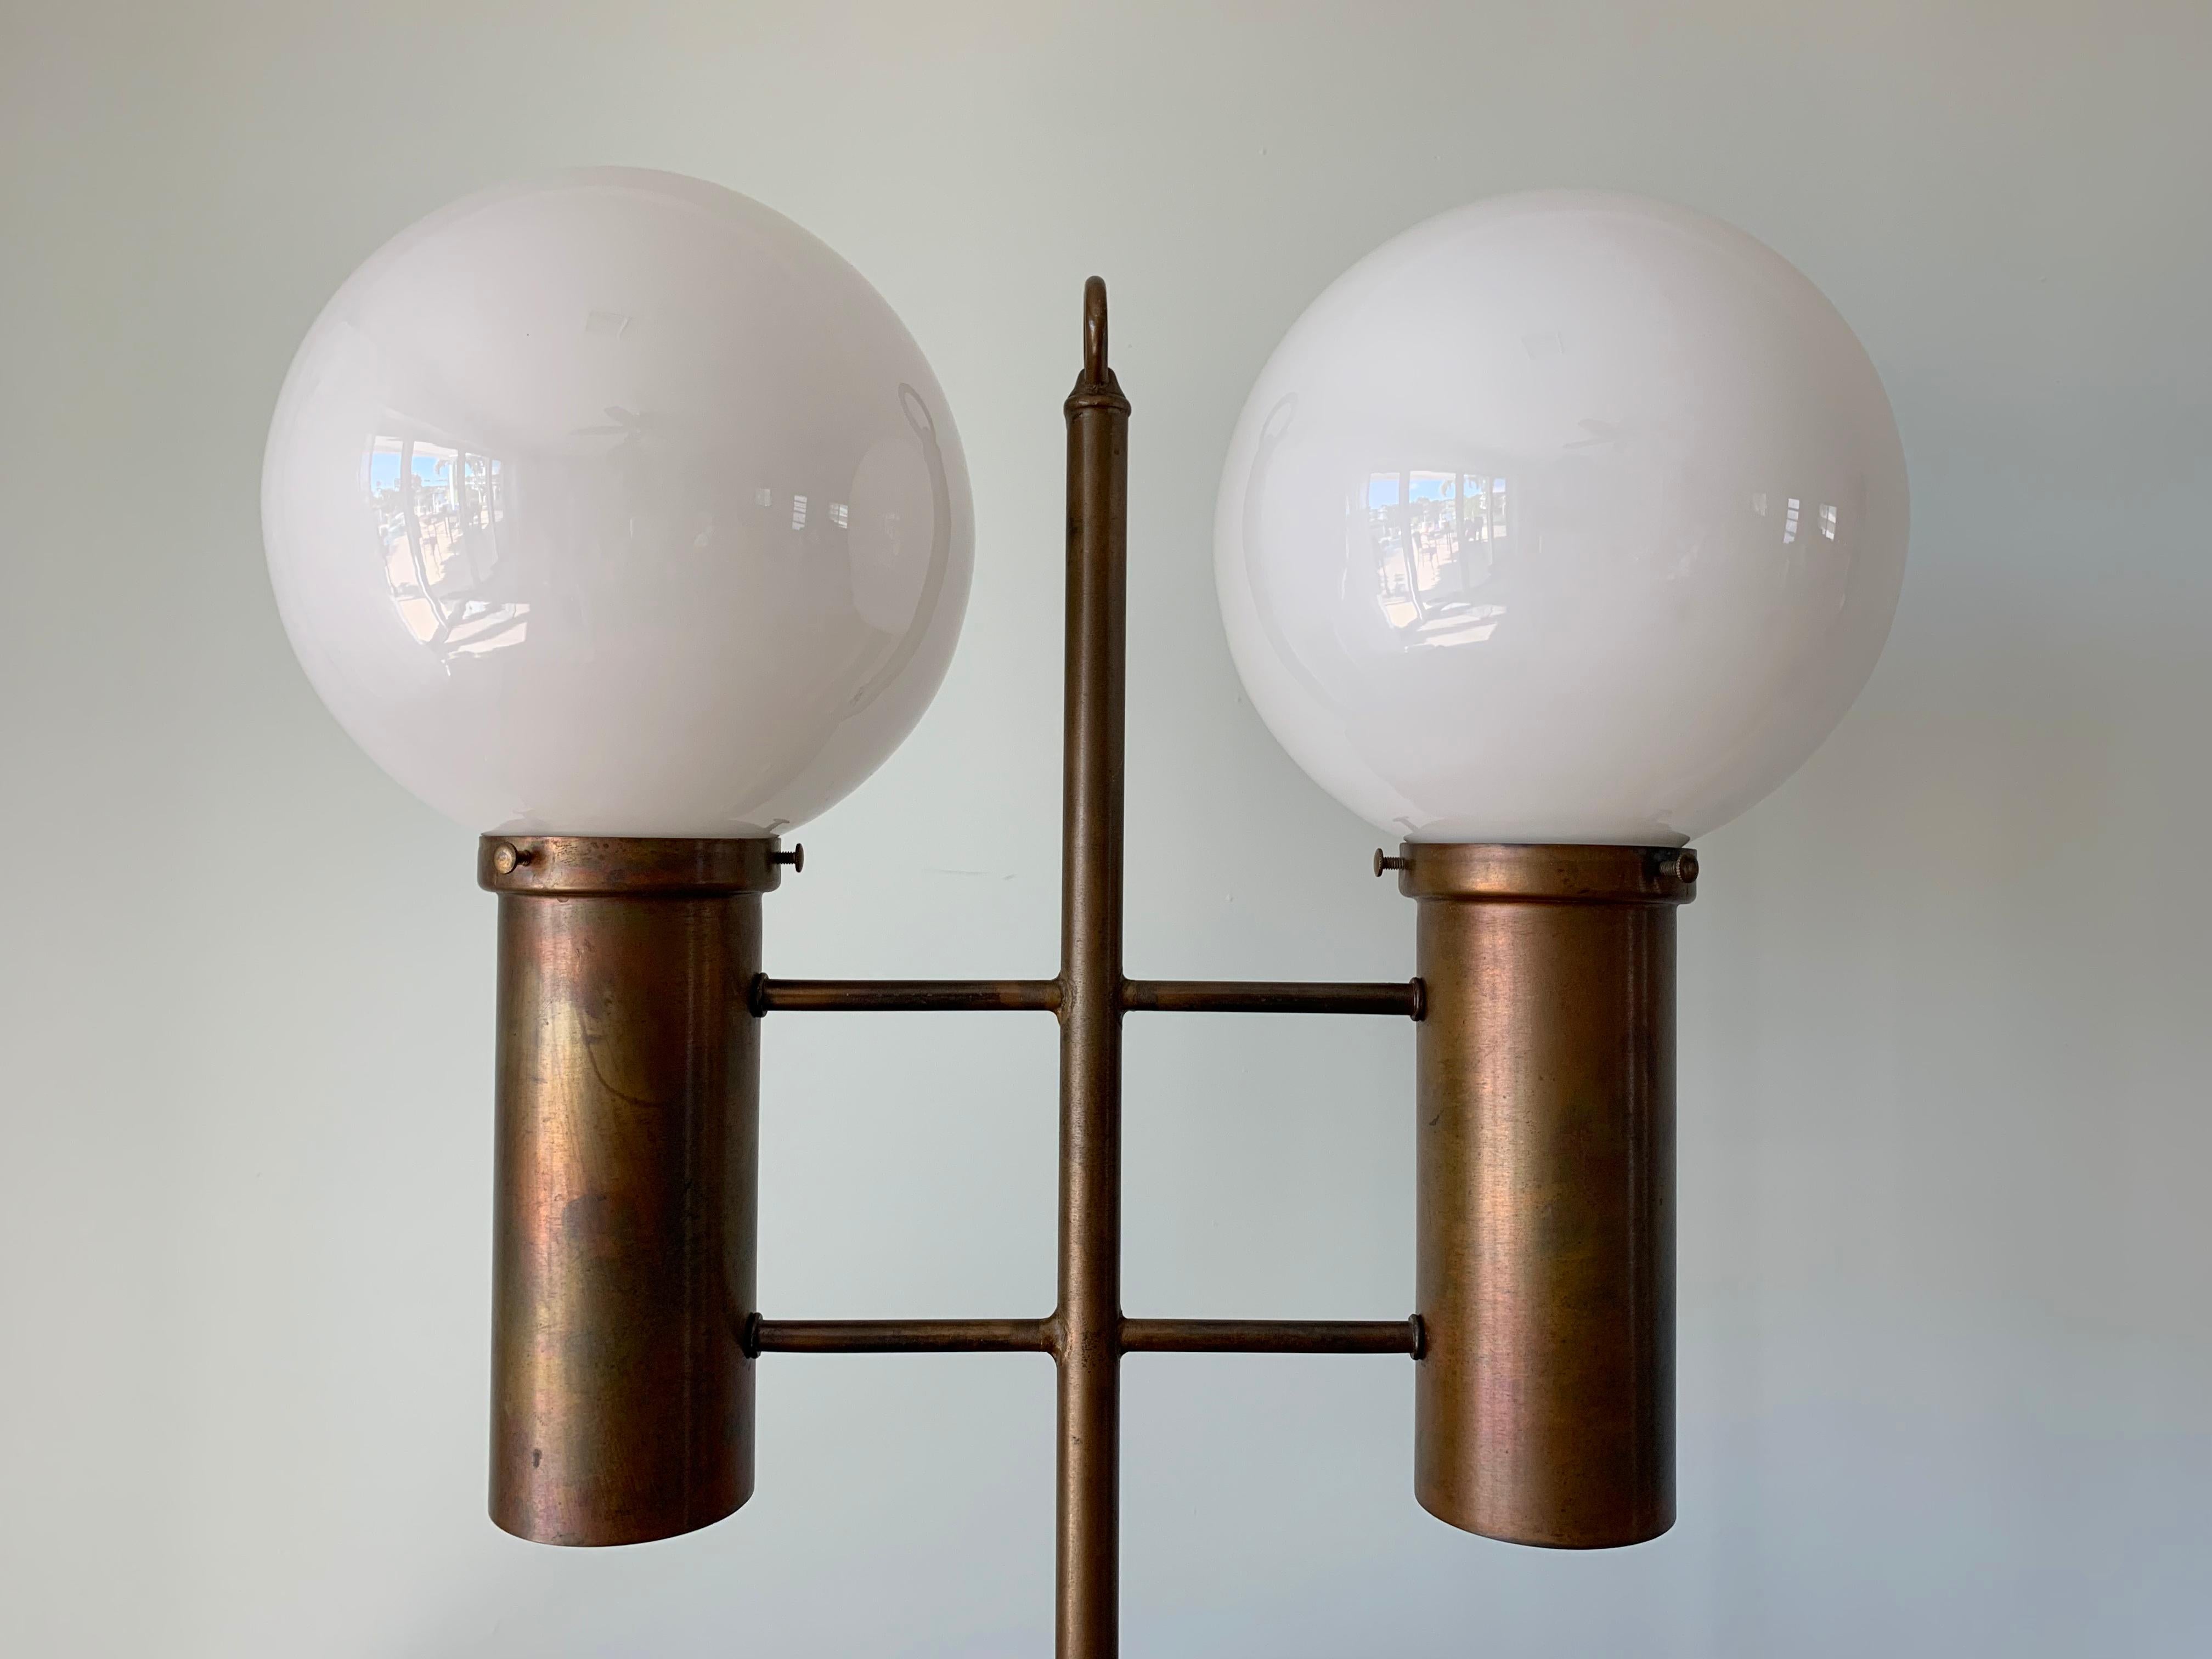 Large table lamp by Robert Long.
The lamp is made from solid brass and opal glass.
It features 2 sockets for the glass globes, 2 sockets for the bottom of the brass cylinders (ambient light) and a 3-way switch (top, bottom and both). Wired for use